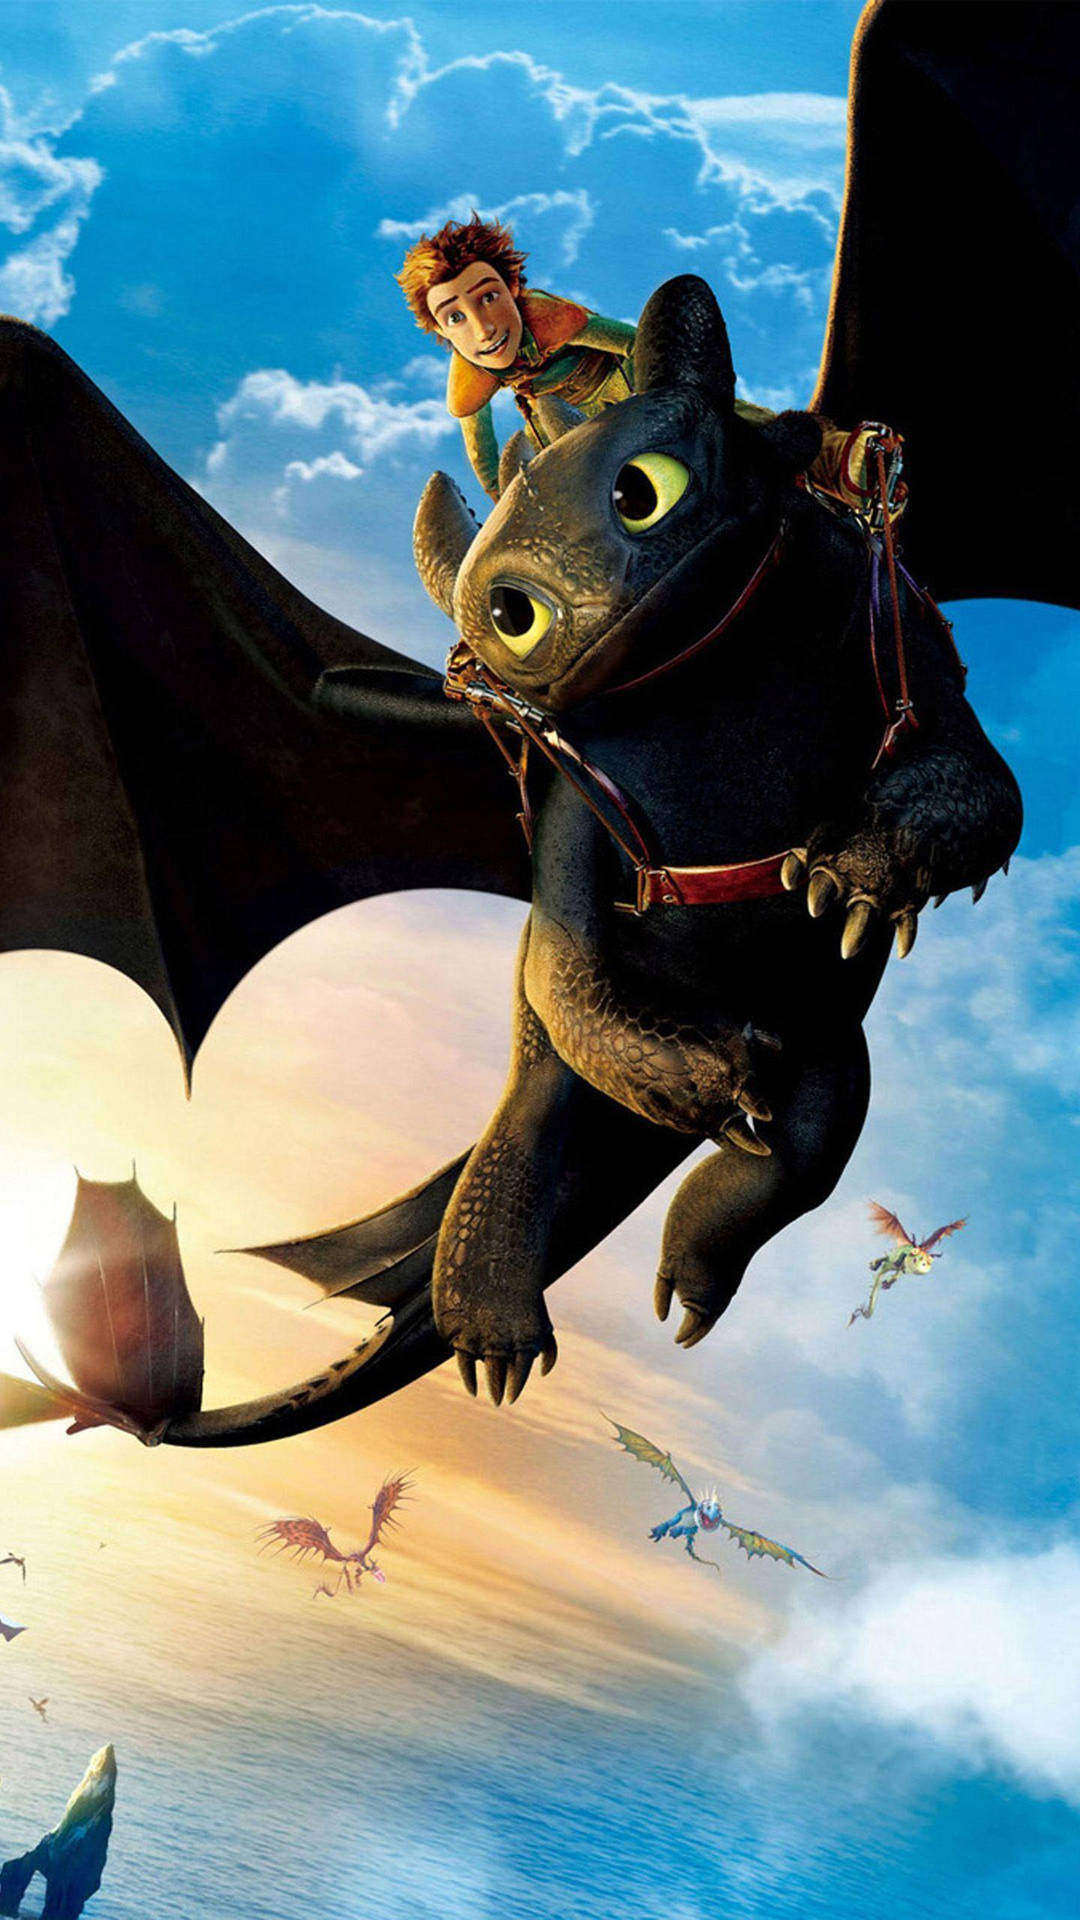 How To Train Your Dragon 1 Poster Wallpaper